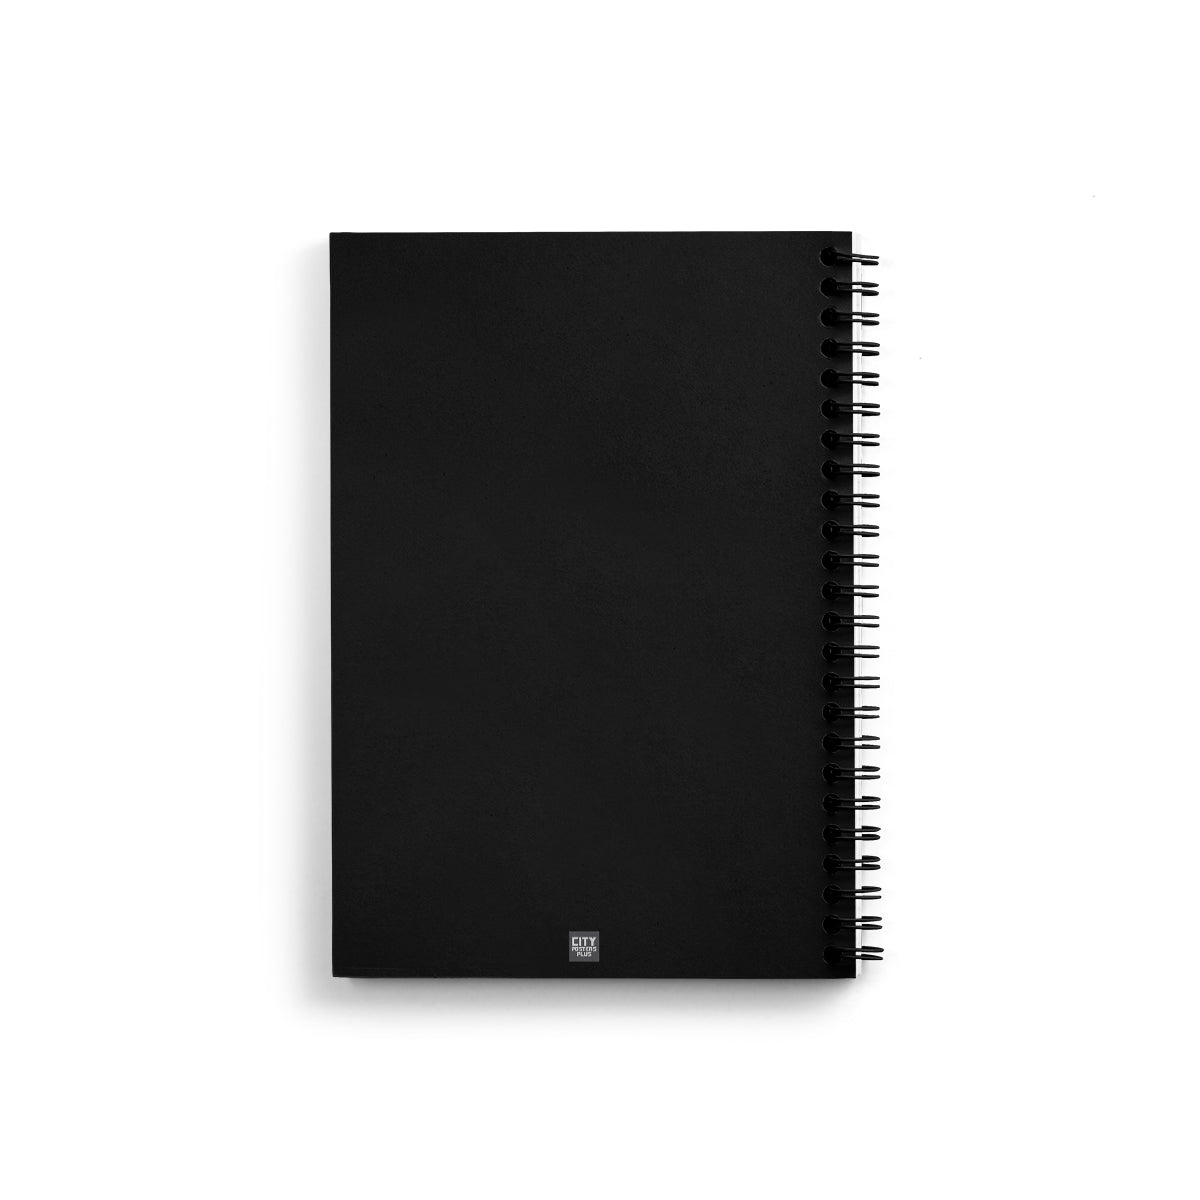 2084 Year Notebook (Black, A5 Size, 100 Pages, Ruled)